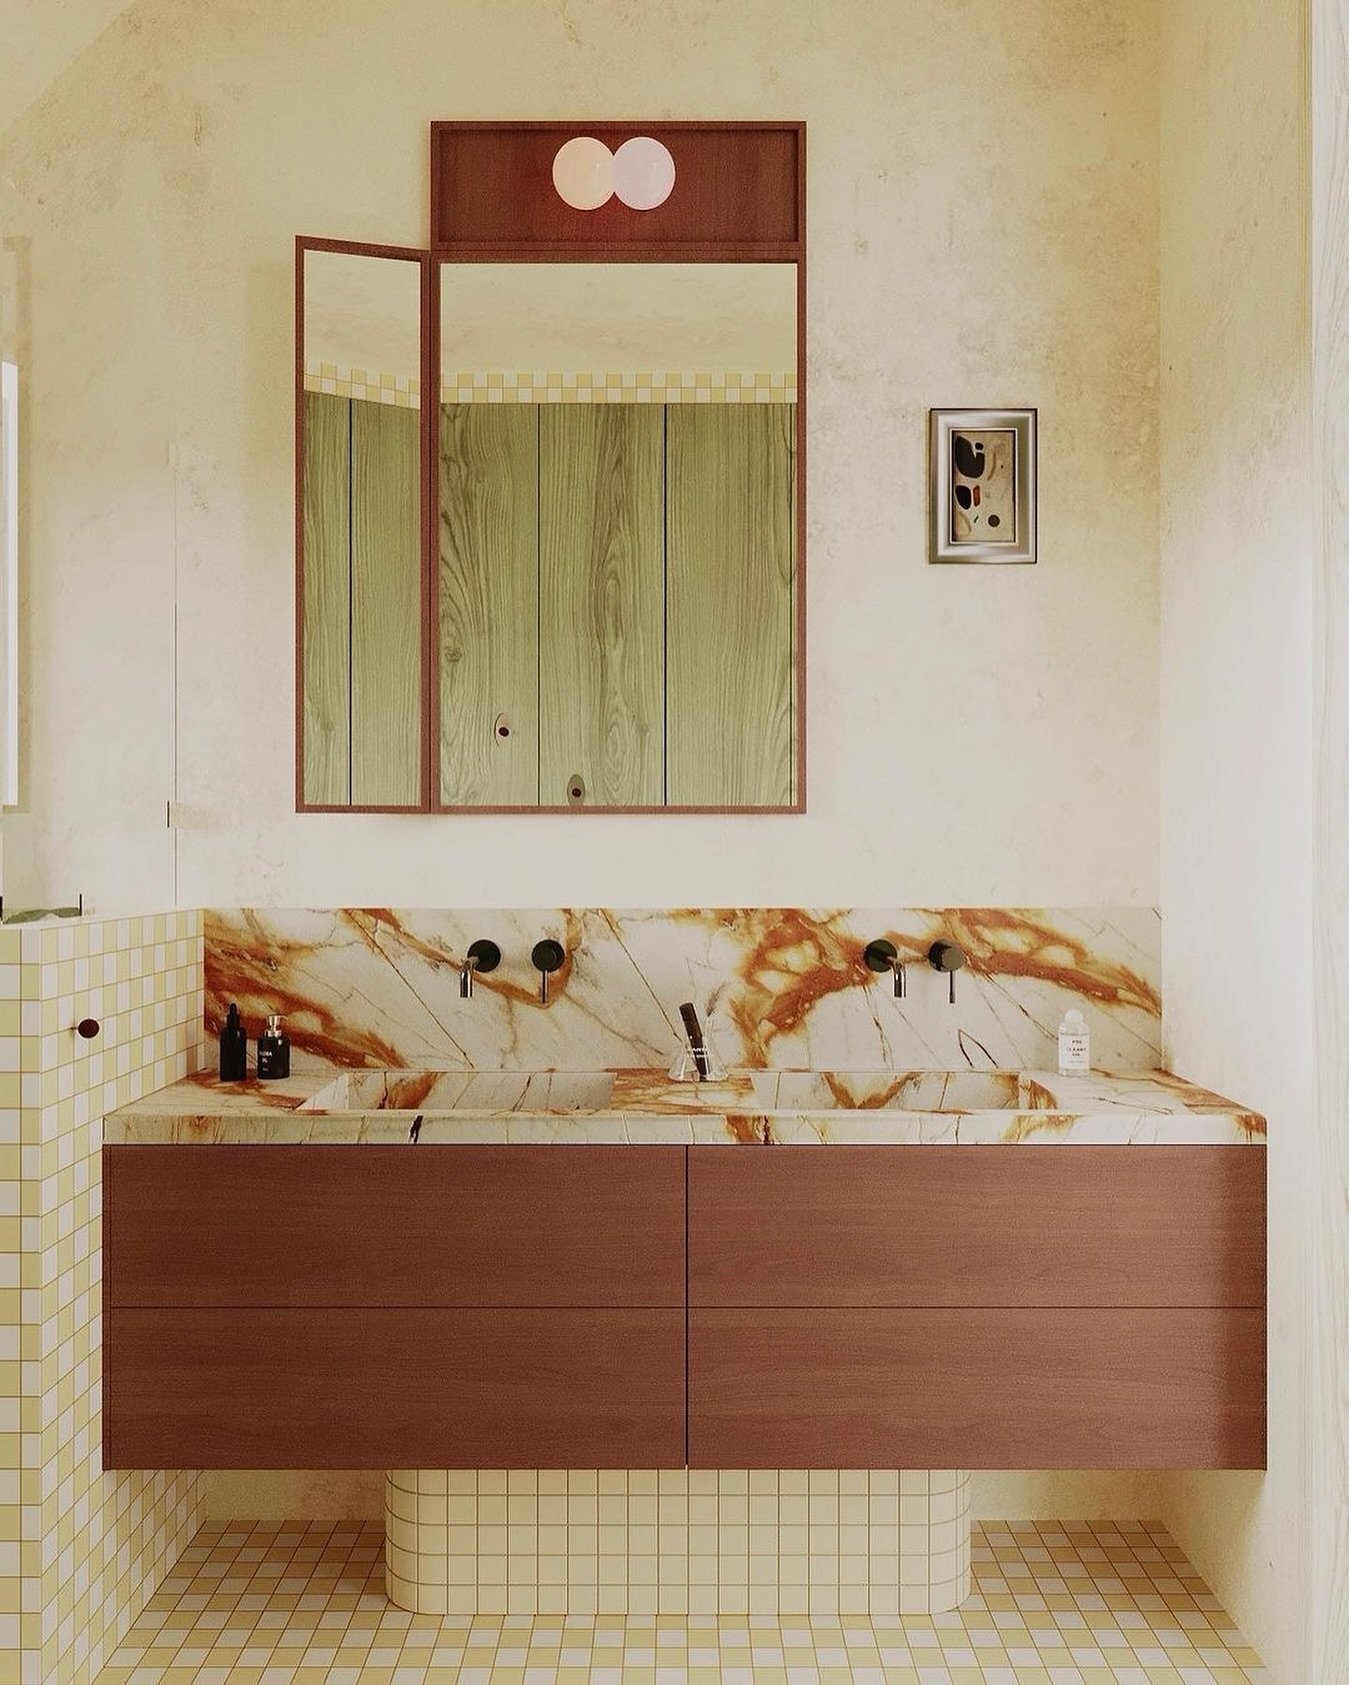 The key details to a bathroom can make all the impact #design